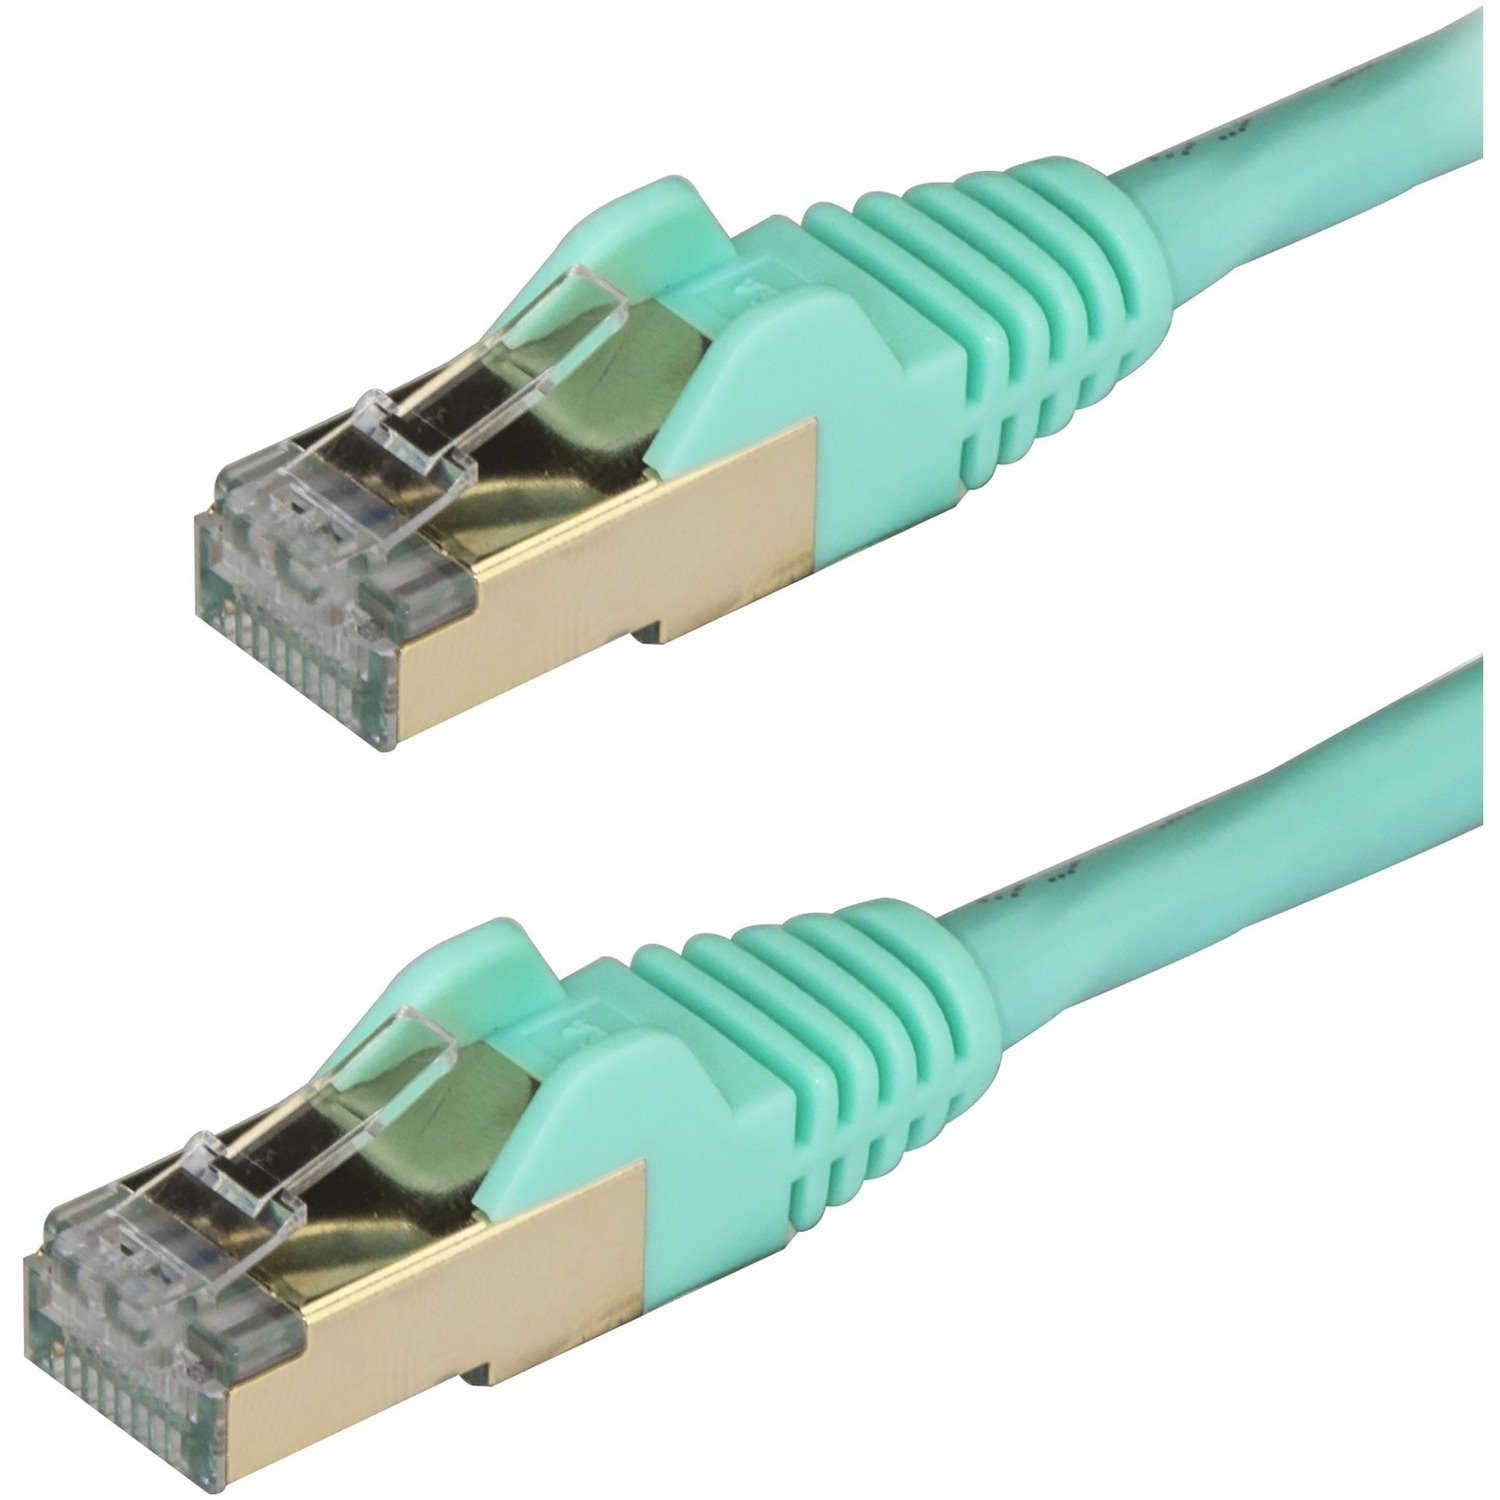 StarTech.com 1 m Category 6a Network Cable for PoE-enabled Device, Computer, Hub, Router, Patch Panel - 1